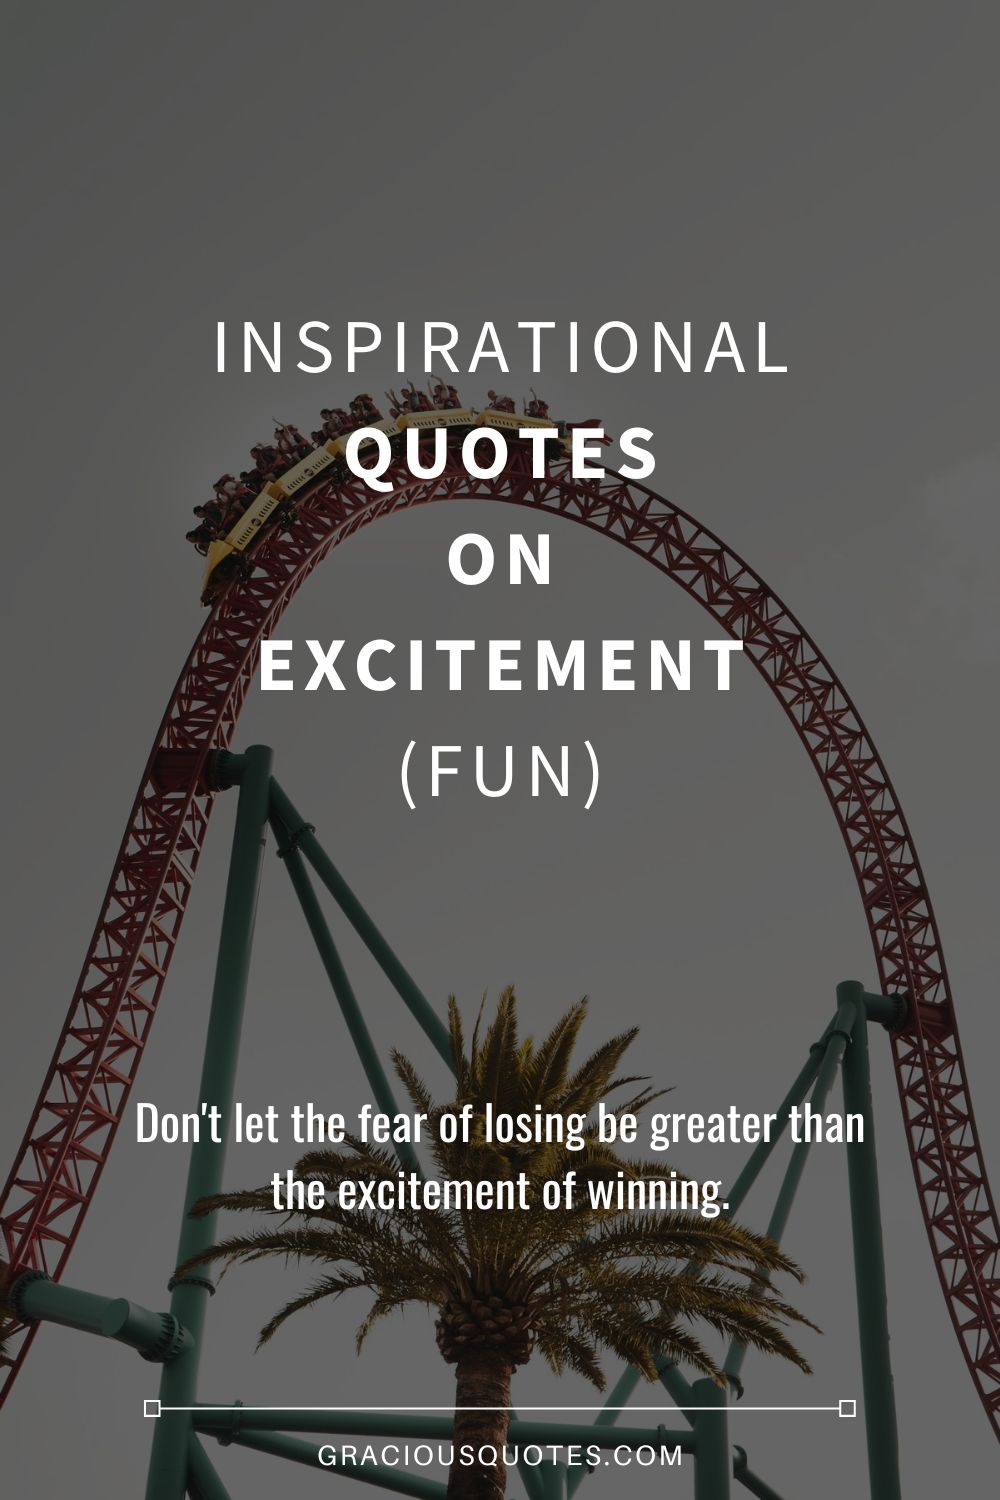 Inspirational Quotes on Excitement (FUN) - Gracious Quotes